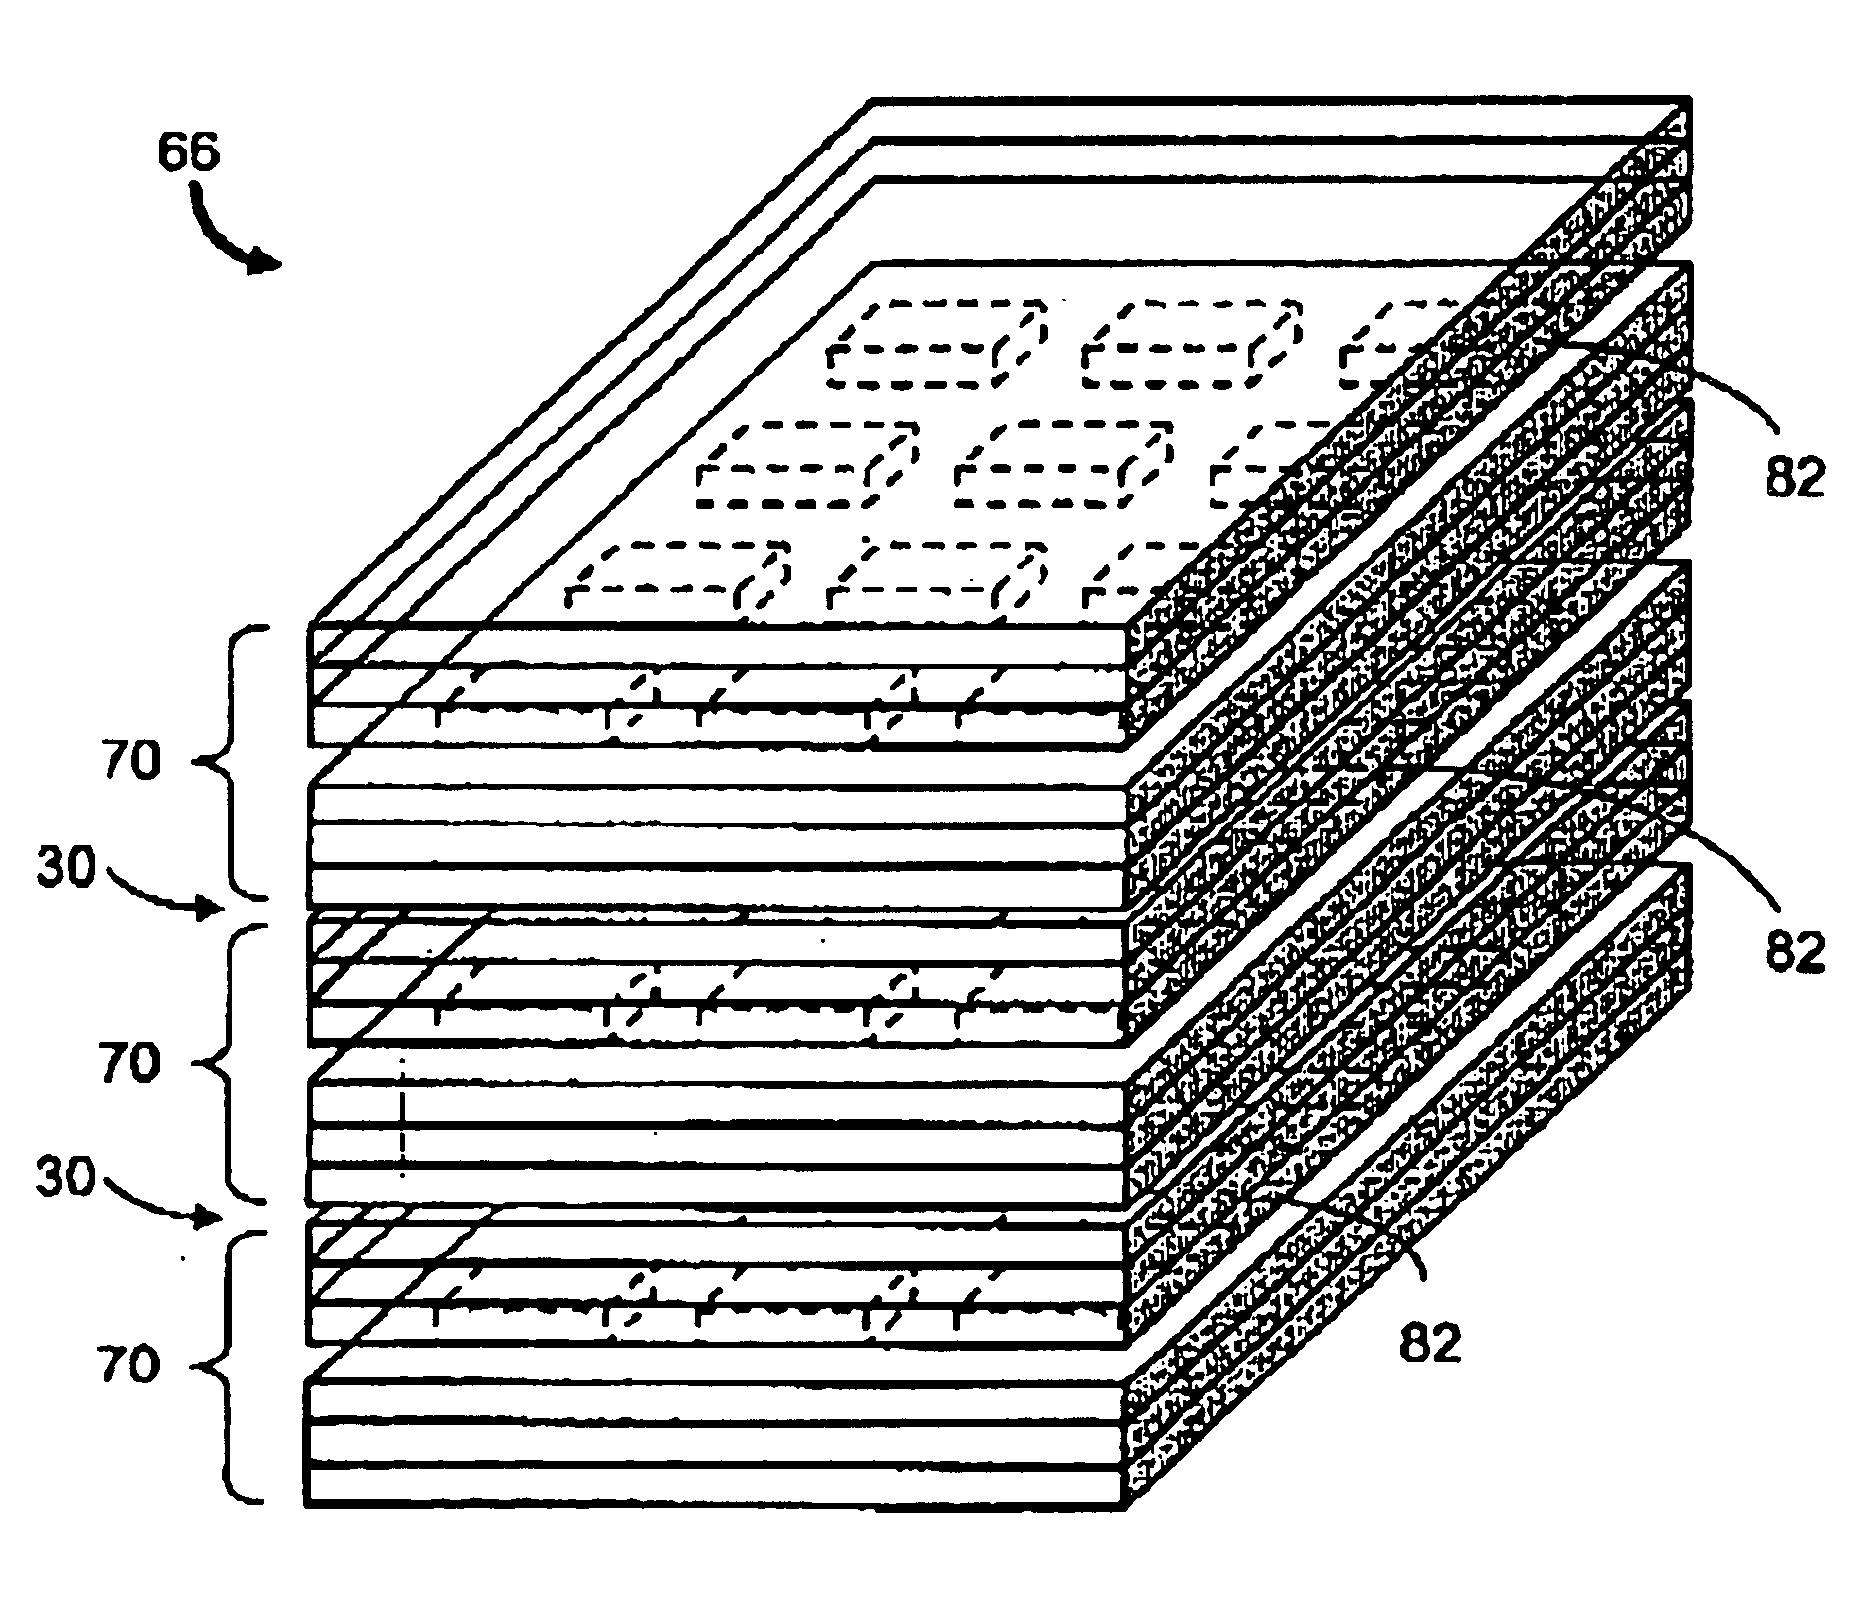 Electromagnetic coupling connector for three-dimensional electronic circuits